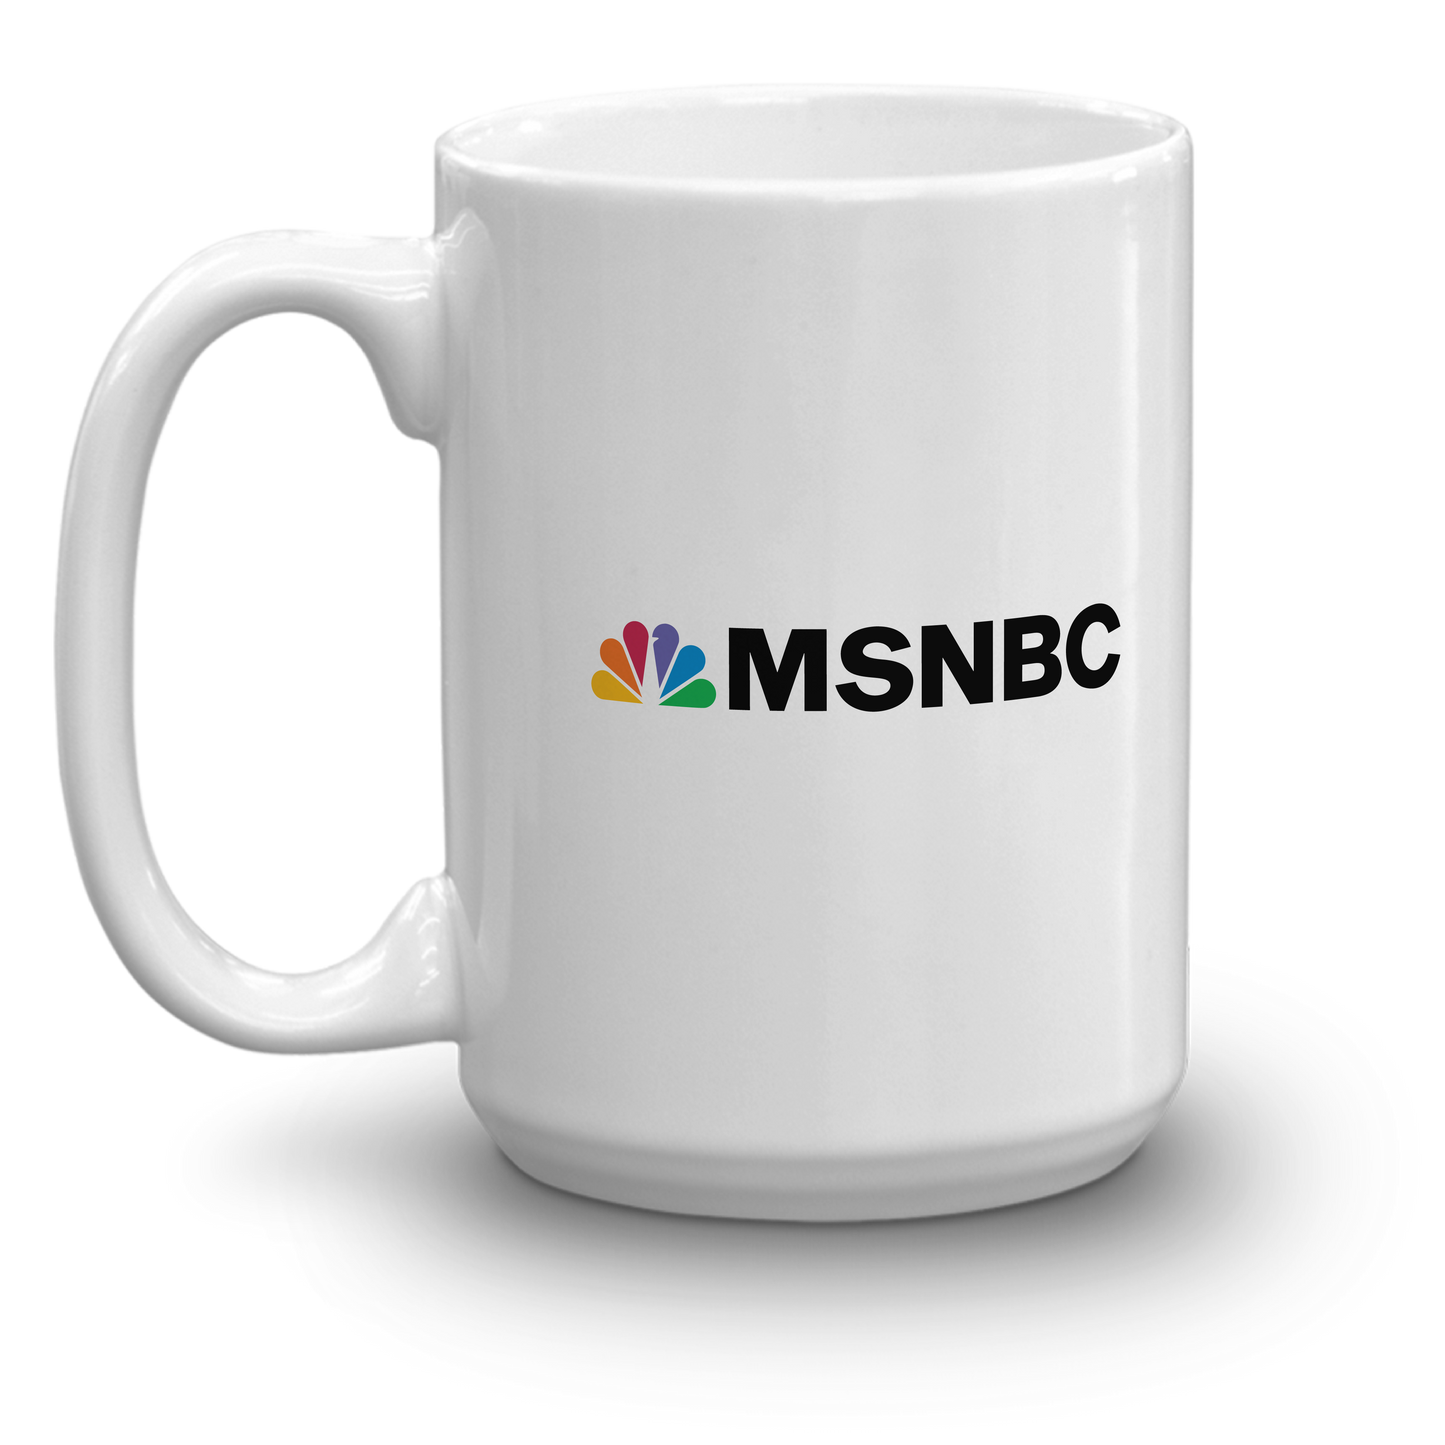 All In with Chris Hayes  15 oz Ceramic Mug